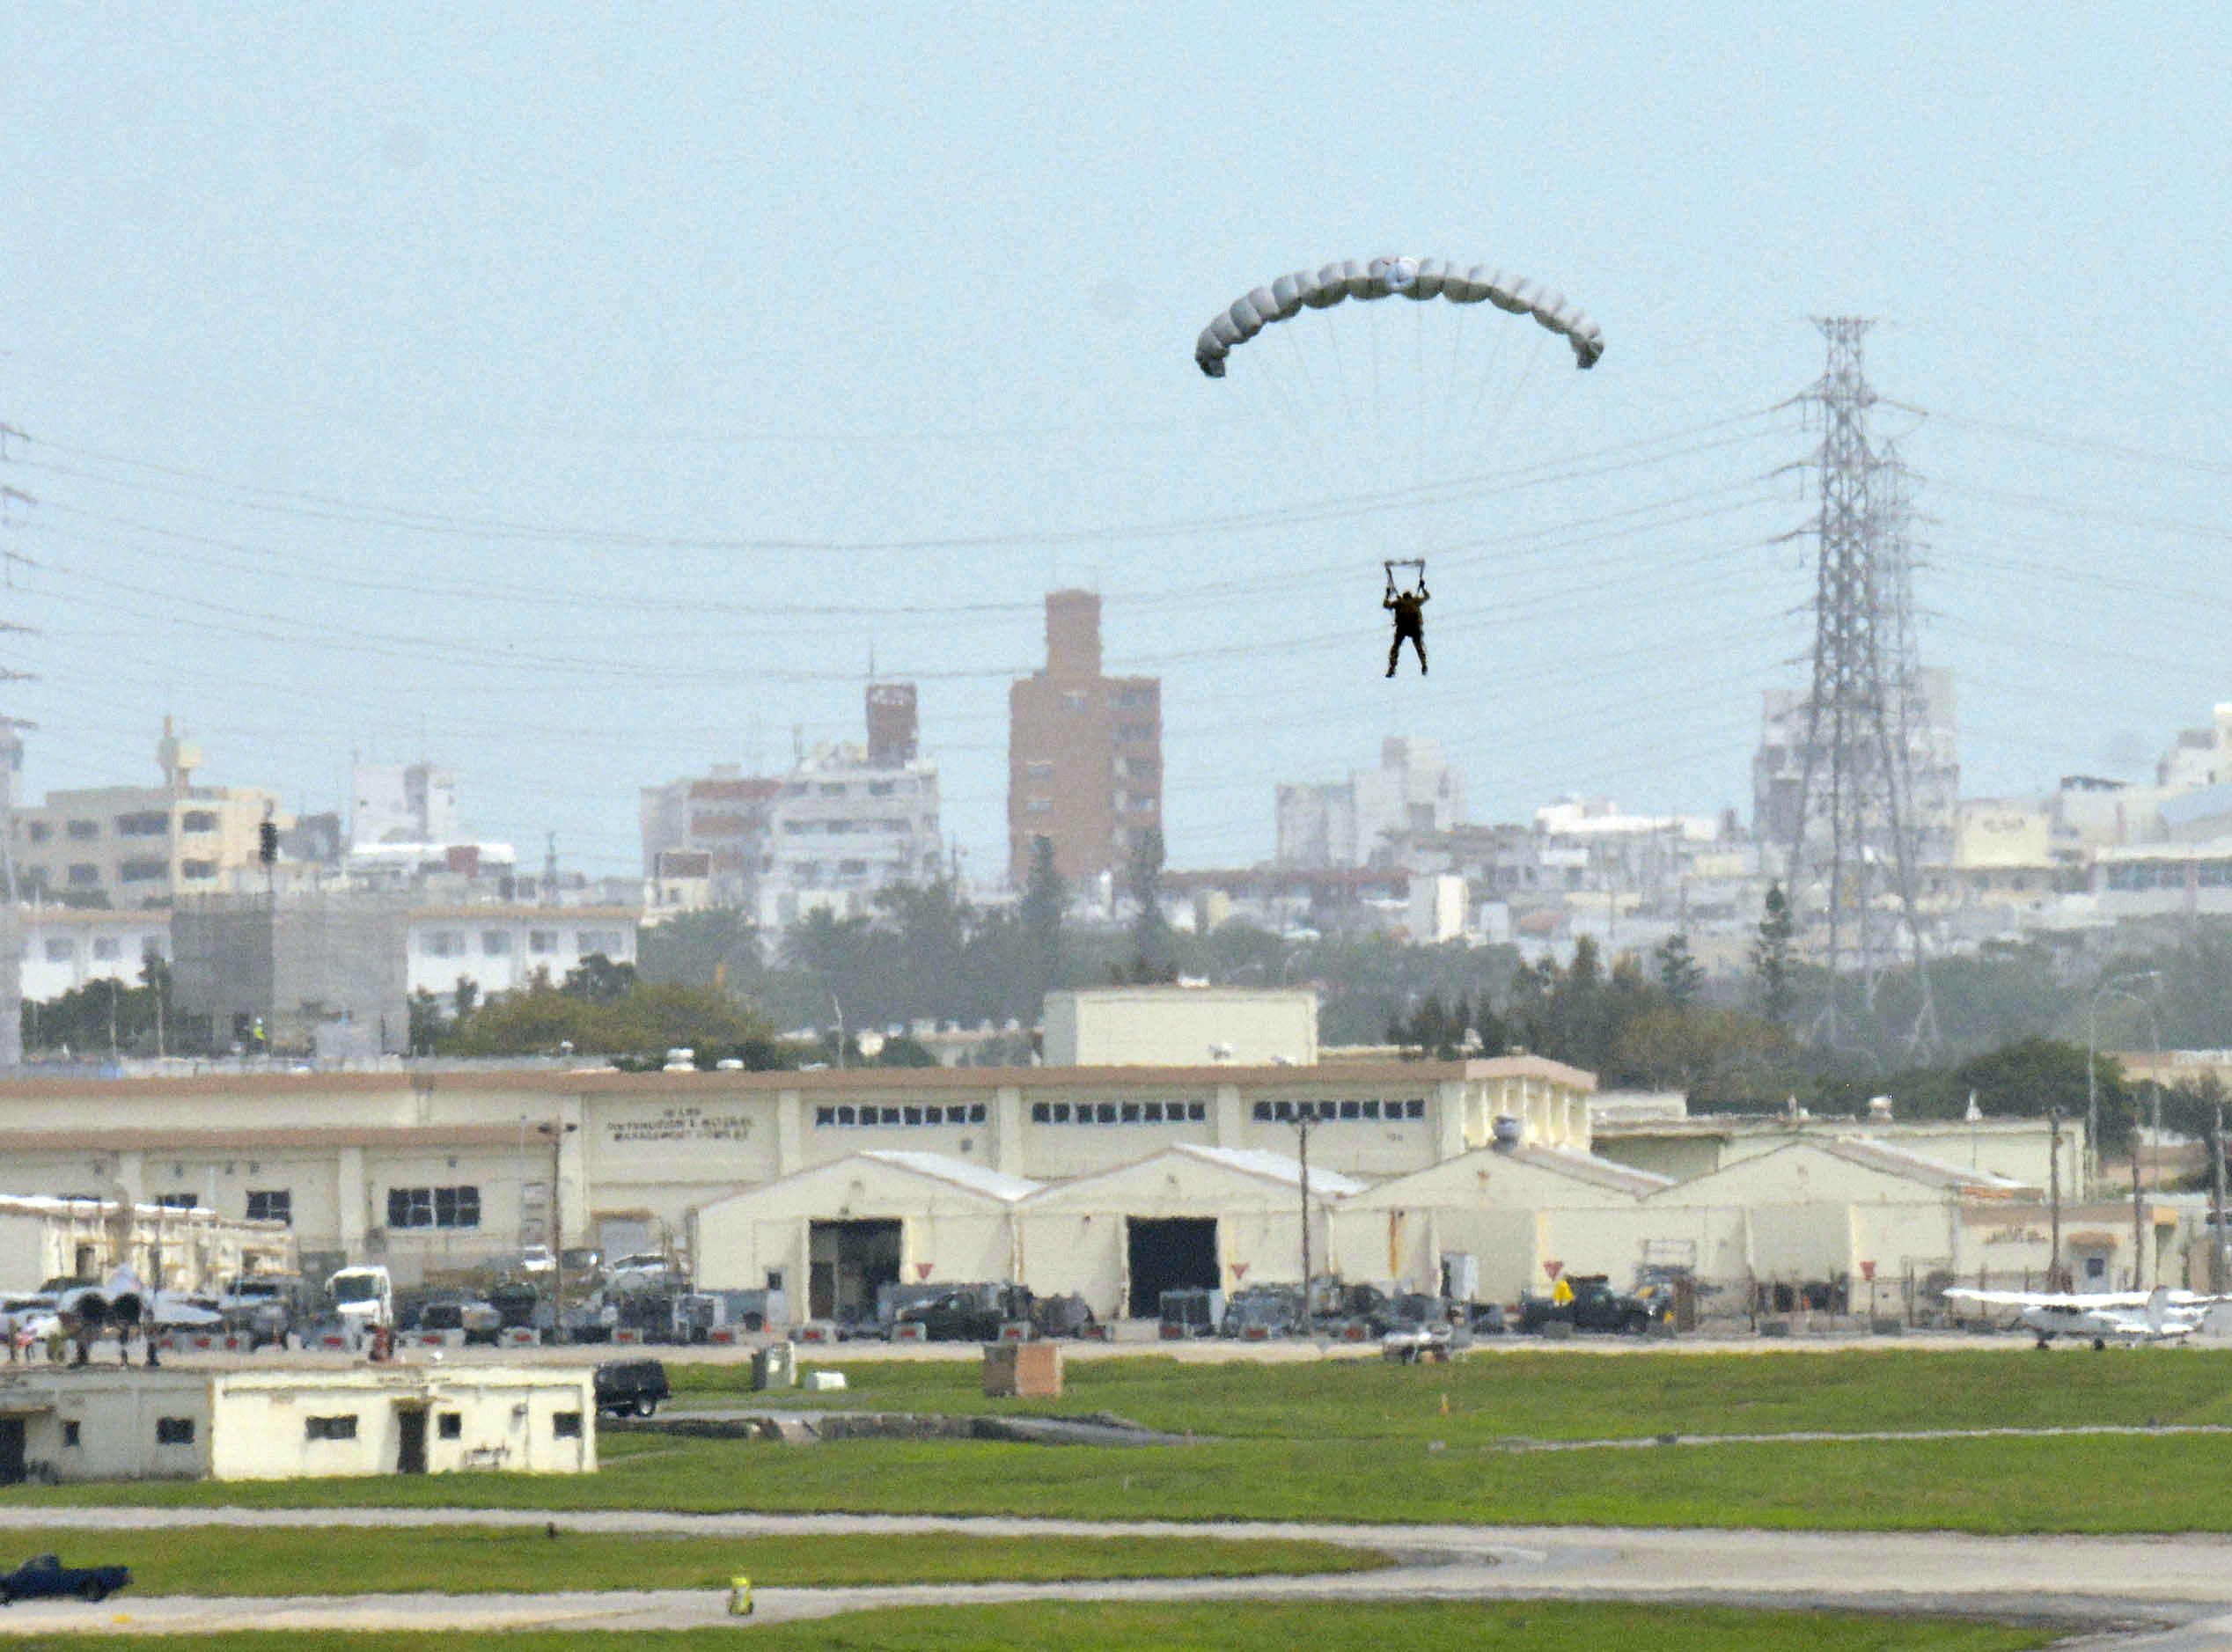 A US air force base in Okinawa, southern Japan. Photo: Kyodo